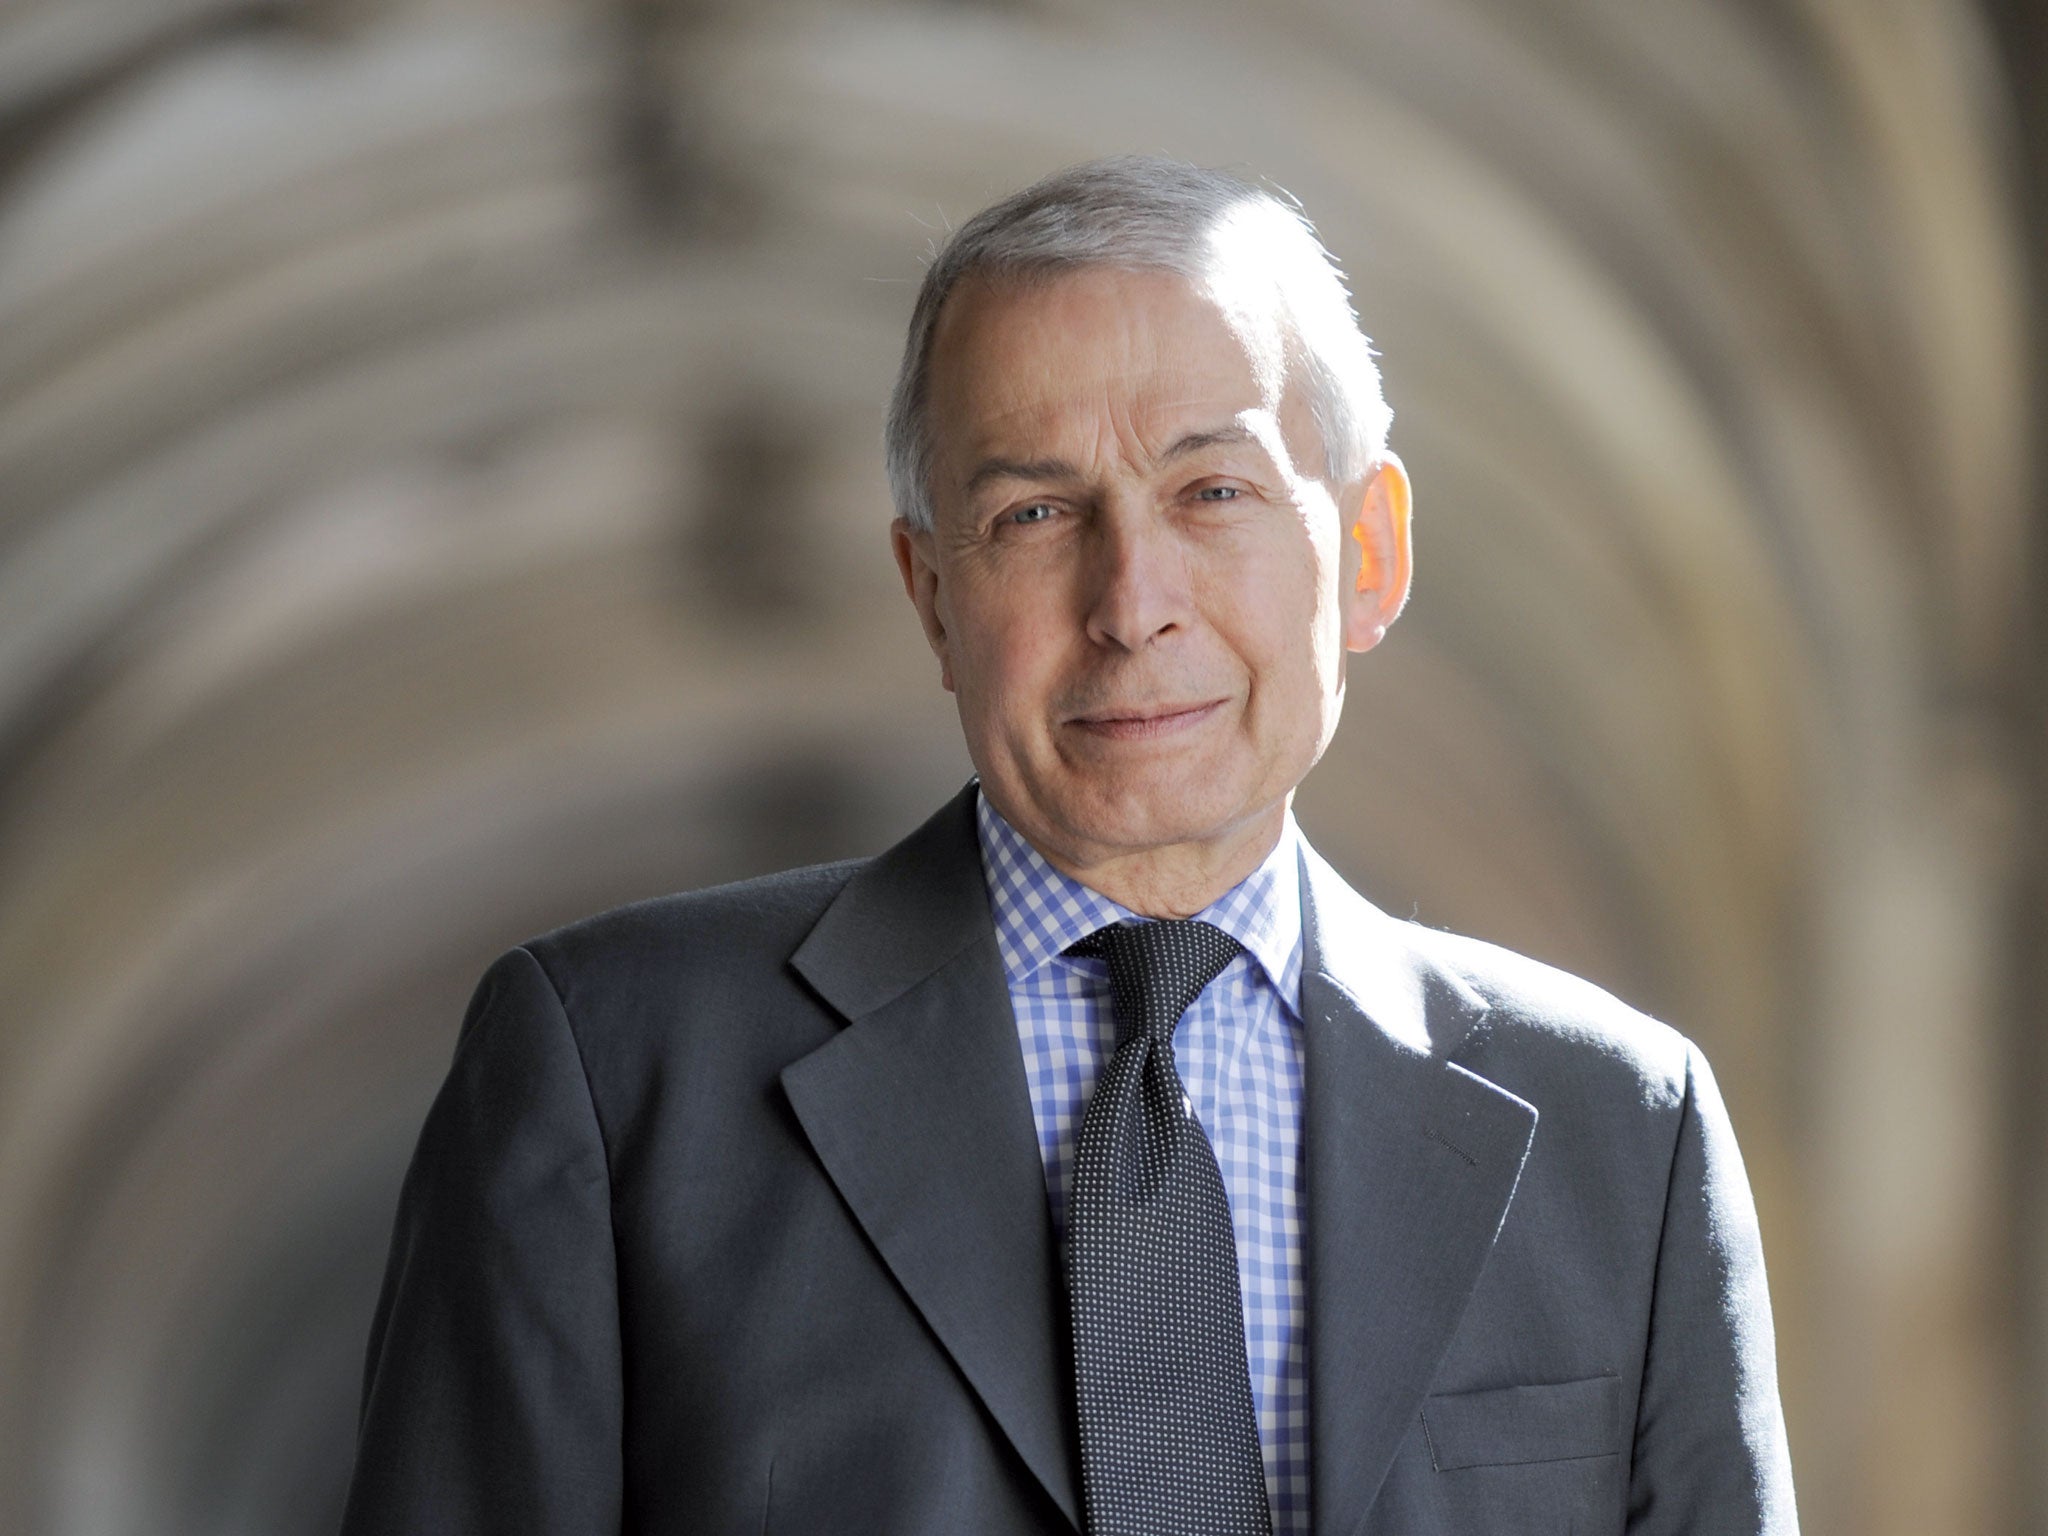 Frank Field: The former Welfare minister said the 'tax' was the most vicious since the poll tax